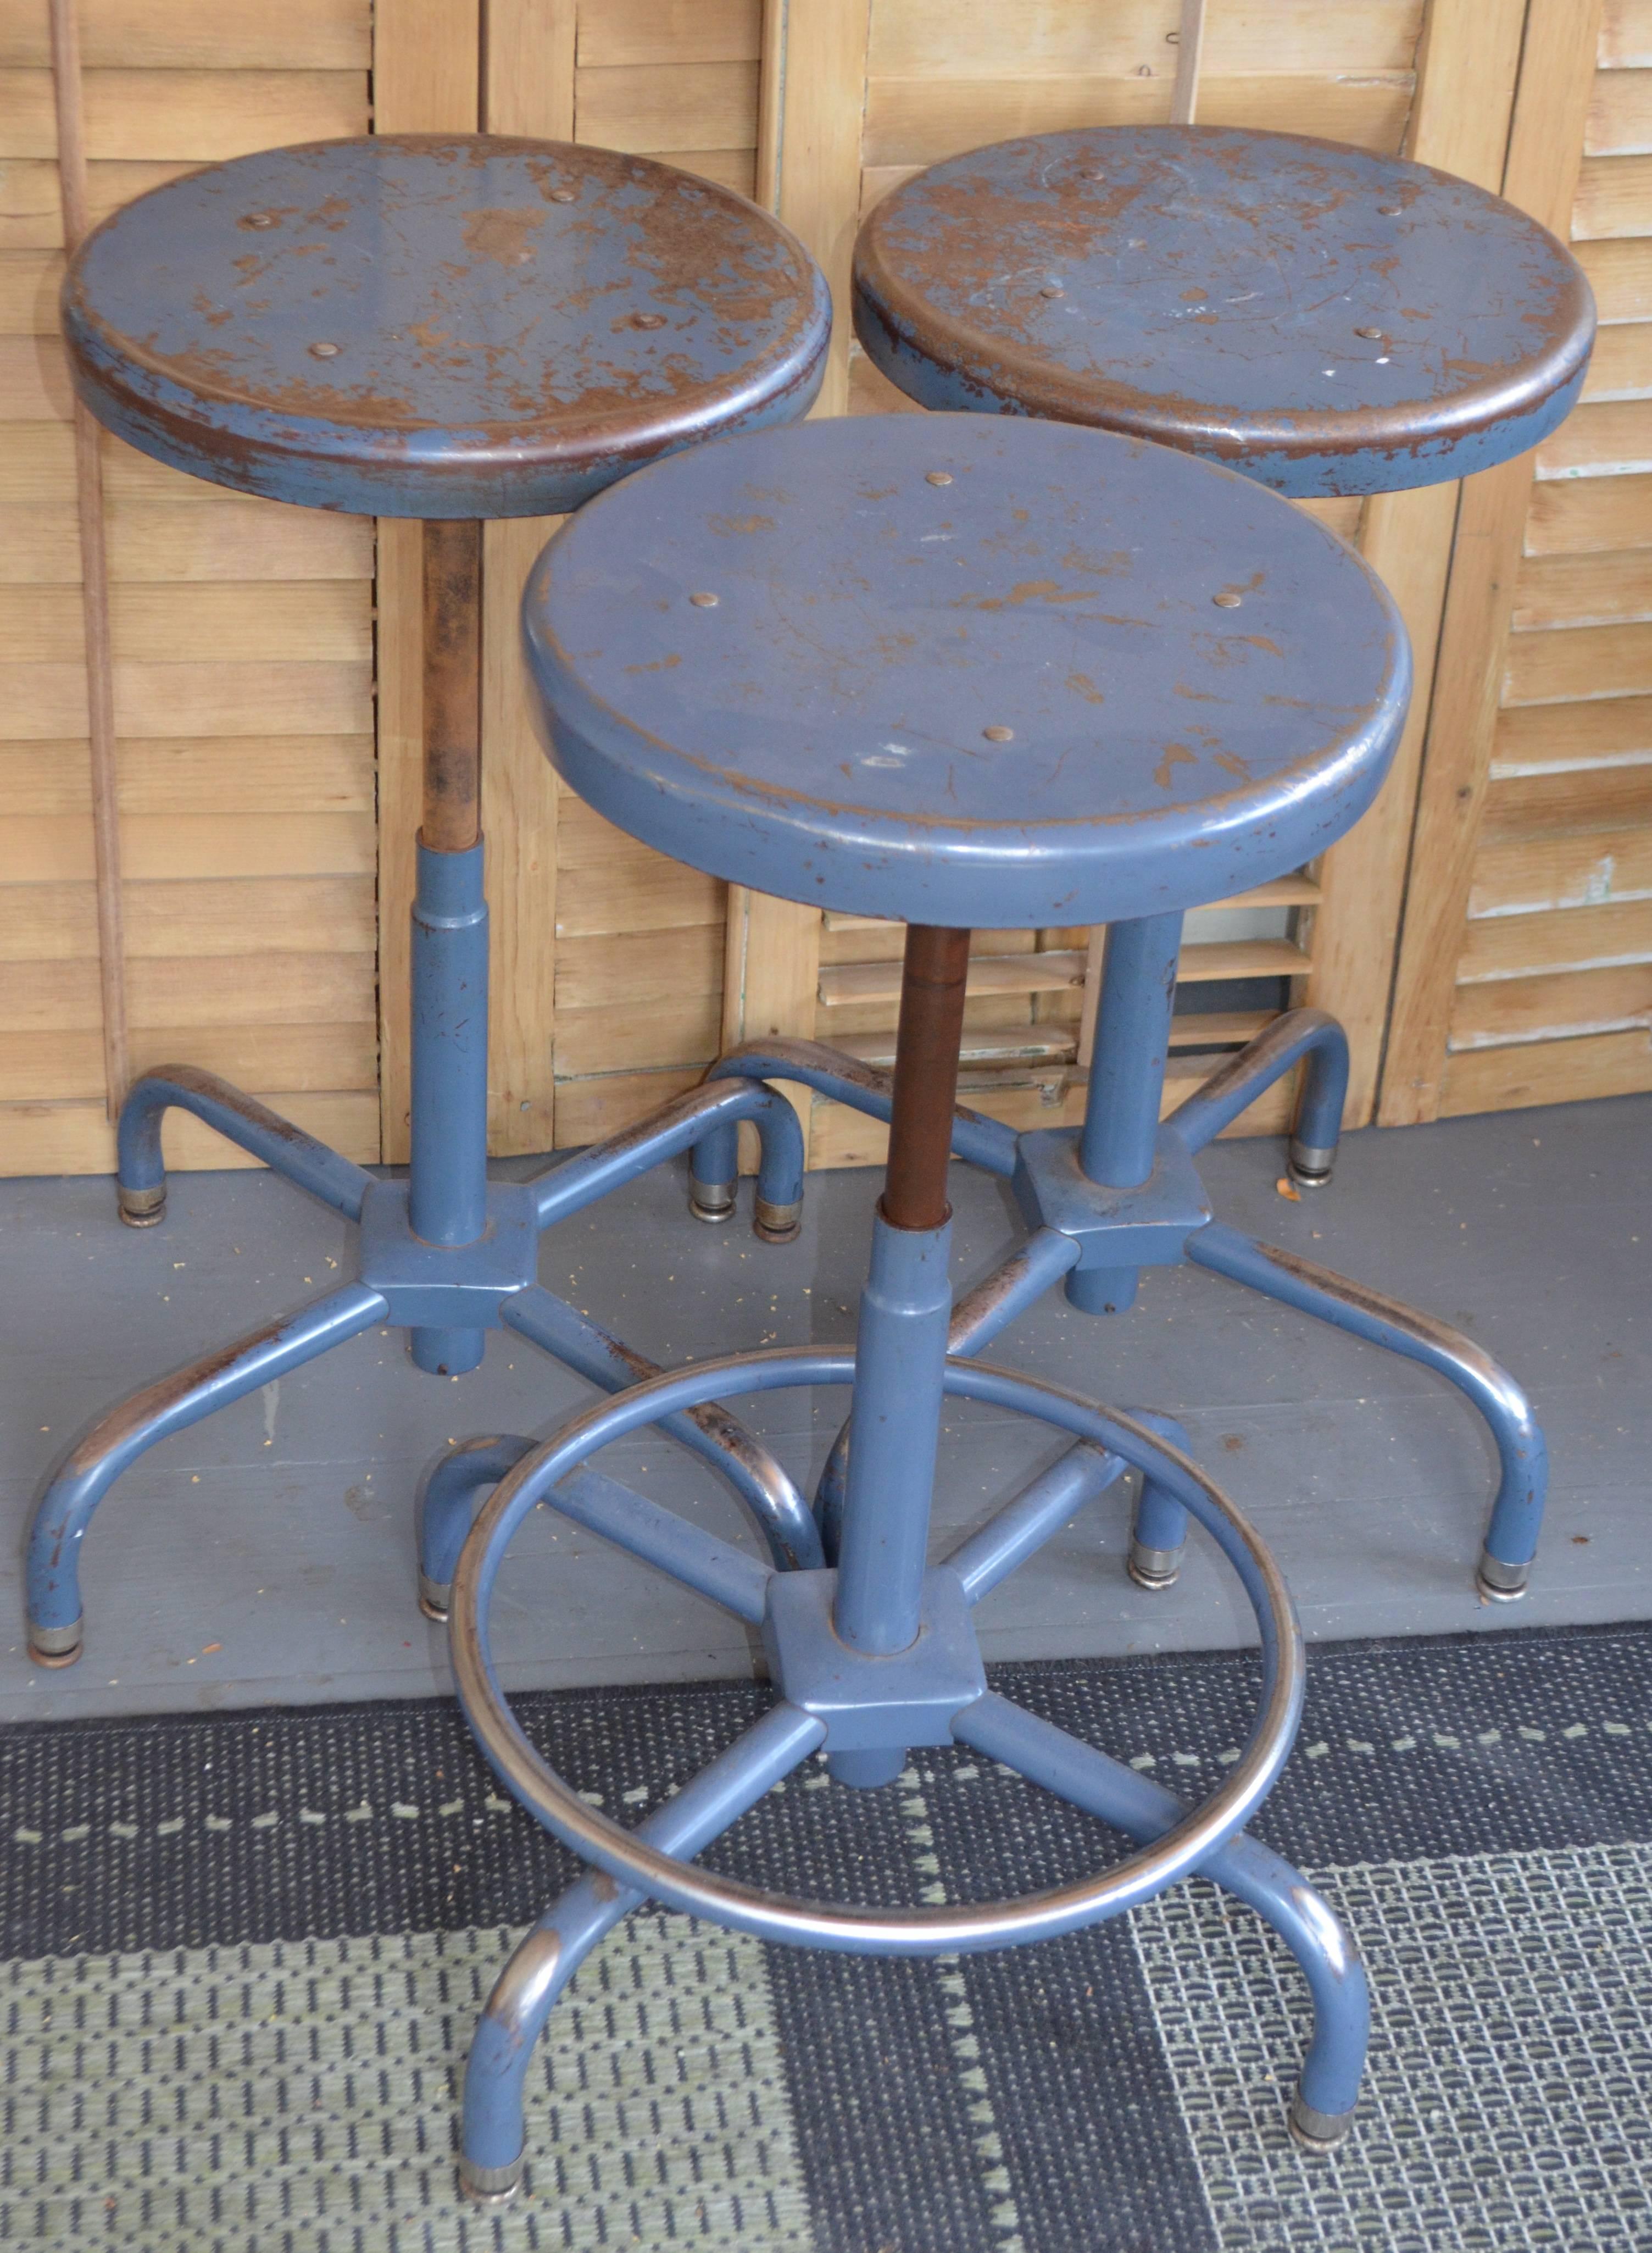 Set of three adjustable steel stools that sit sturdily on four legs. You can easily adjust its height from 18.5